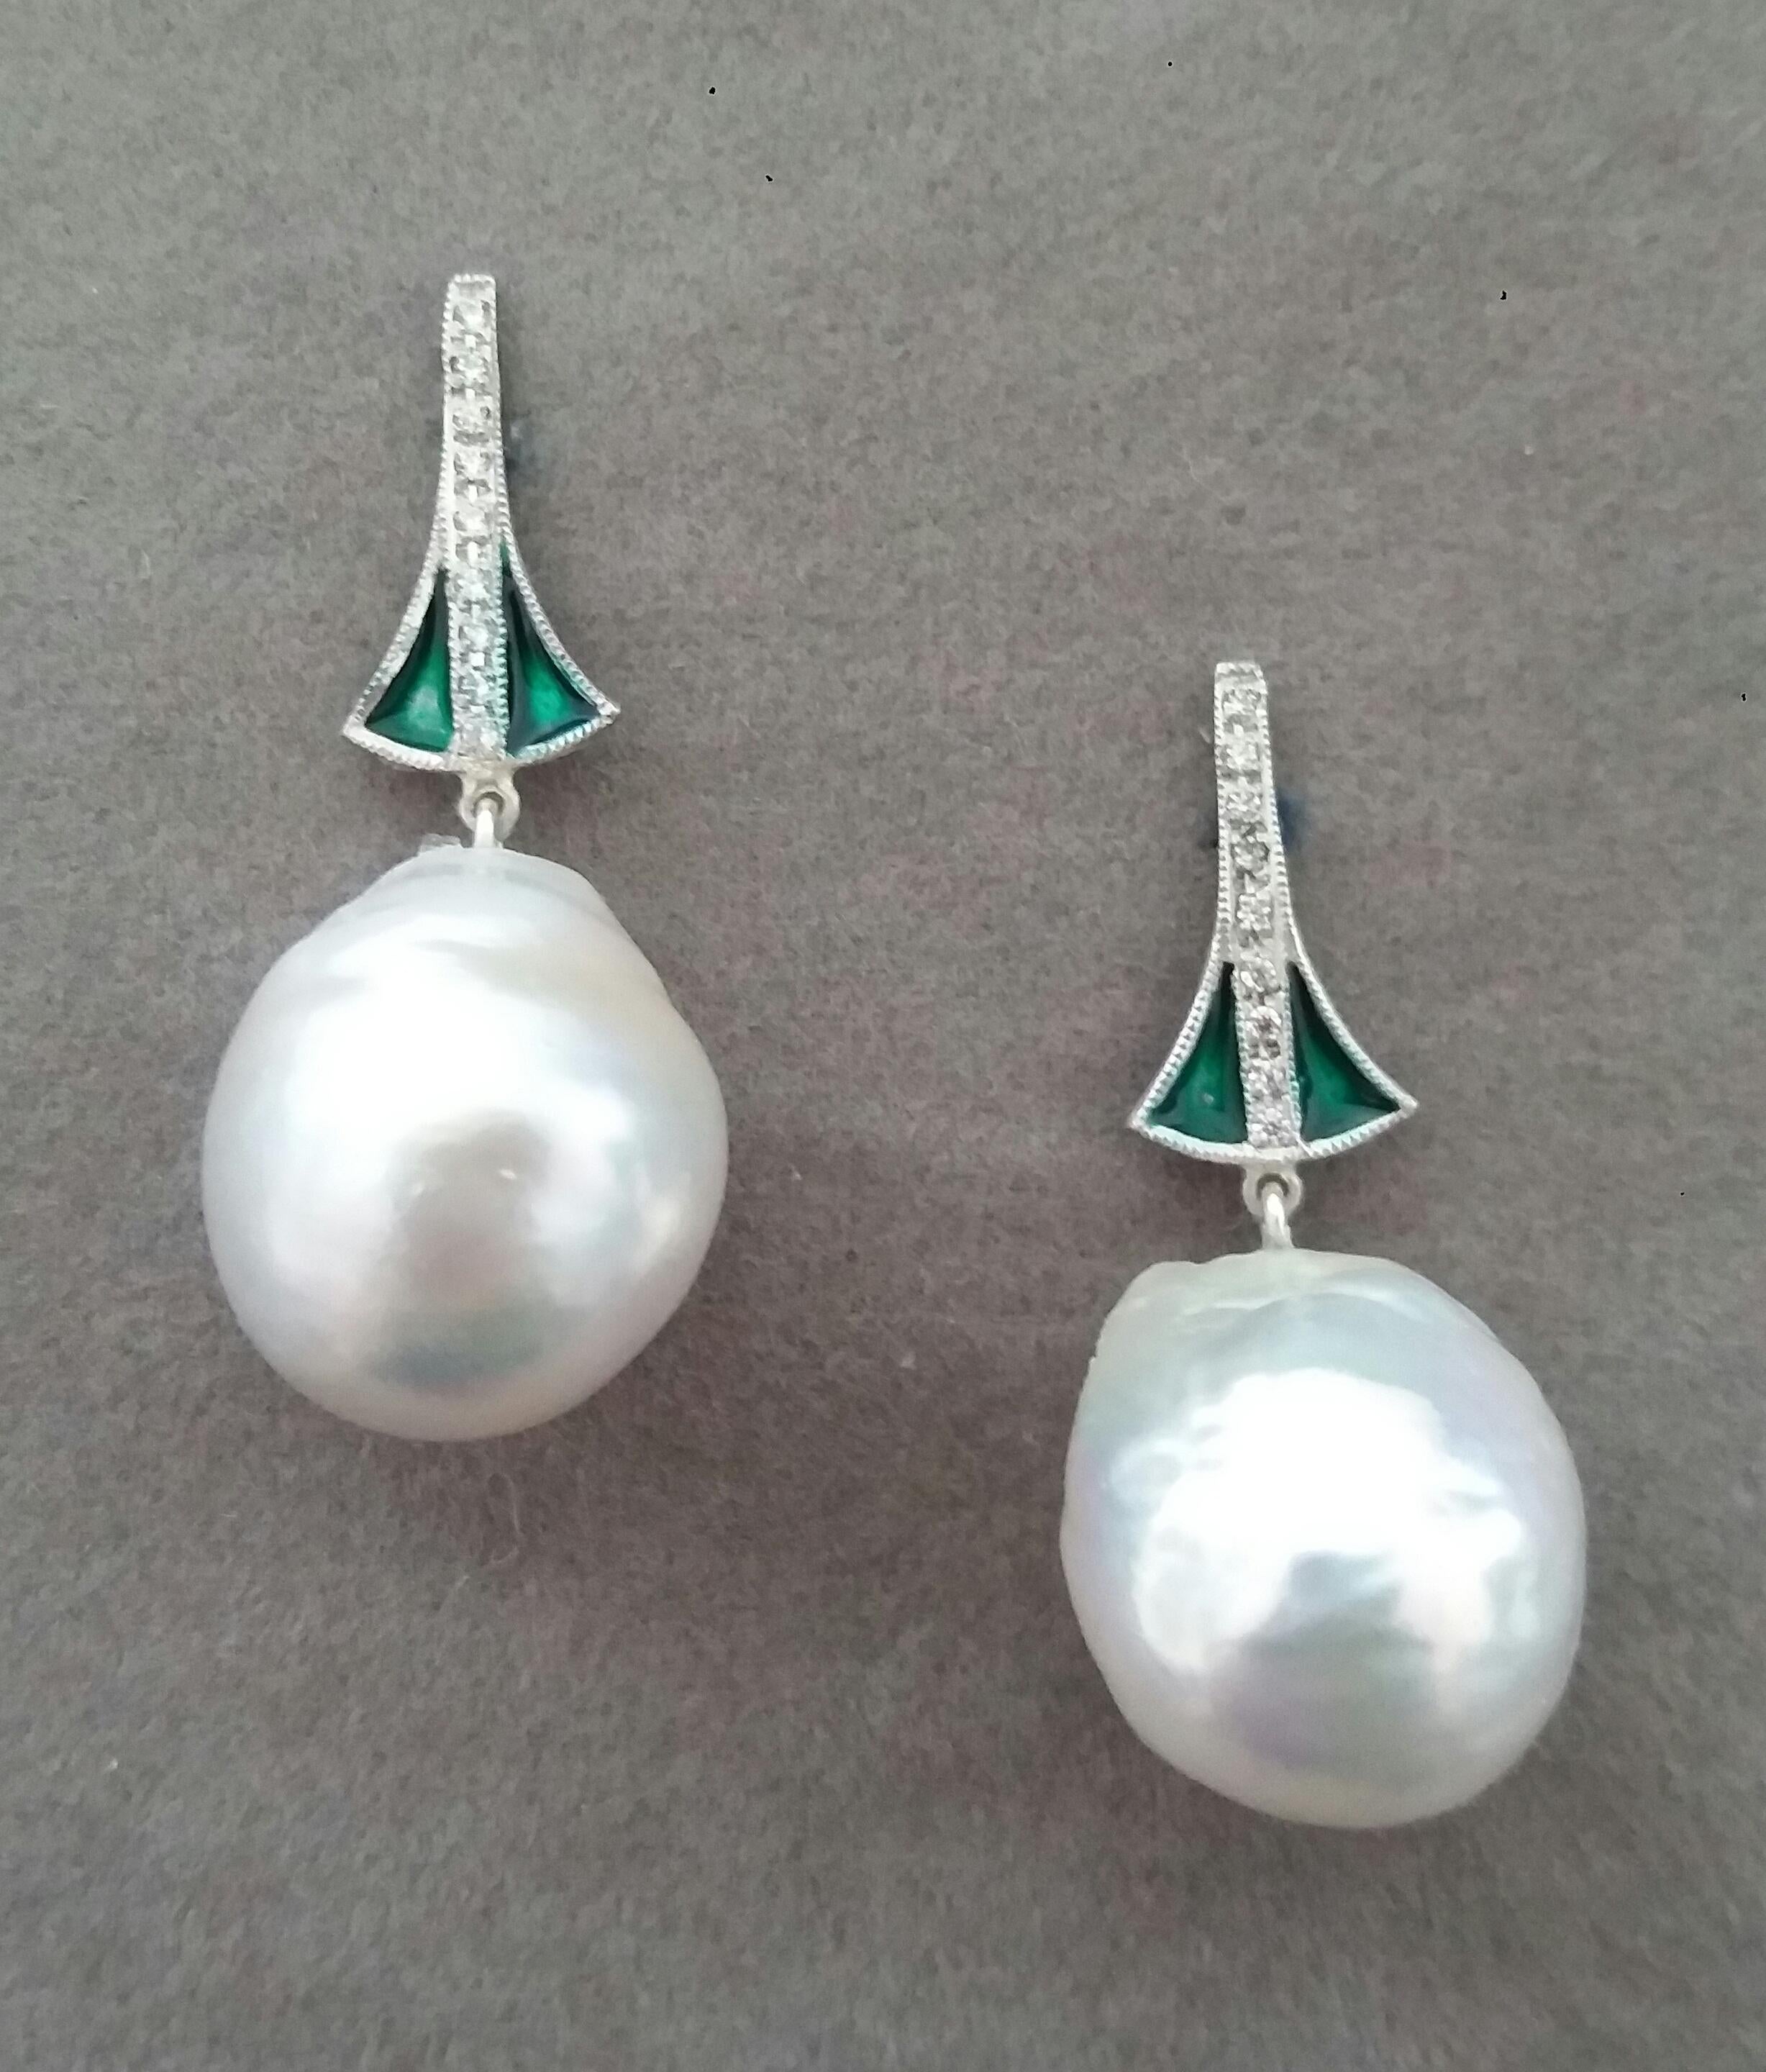 Unique pair of  earrings with on top 2 white gold elements with 18 full cut round Diamonds and Green  Enamel. In the bottom parts we have 2 White  Color Pear Shape Baroque Pearls measuring 14x 17 mm. and weighing 44 carats.

In 1978 our workshop